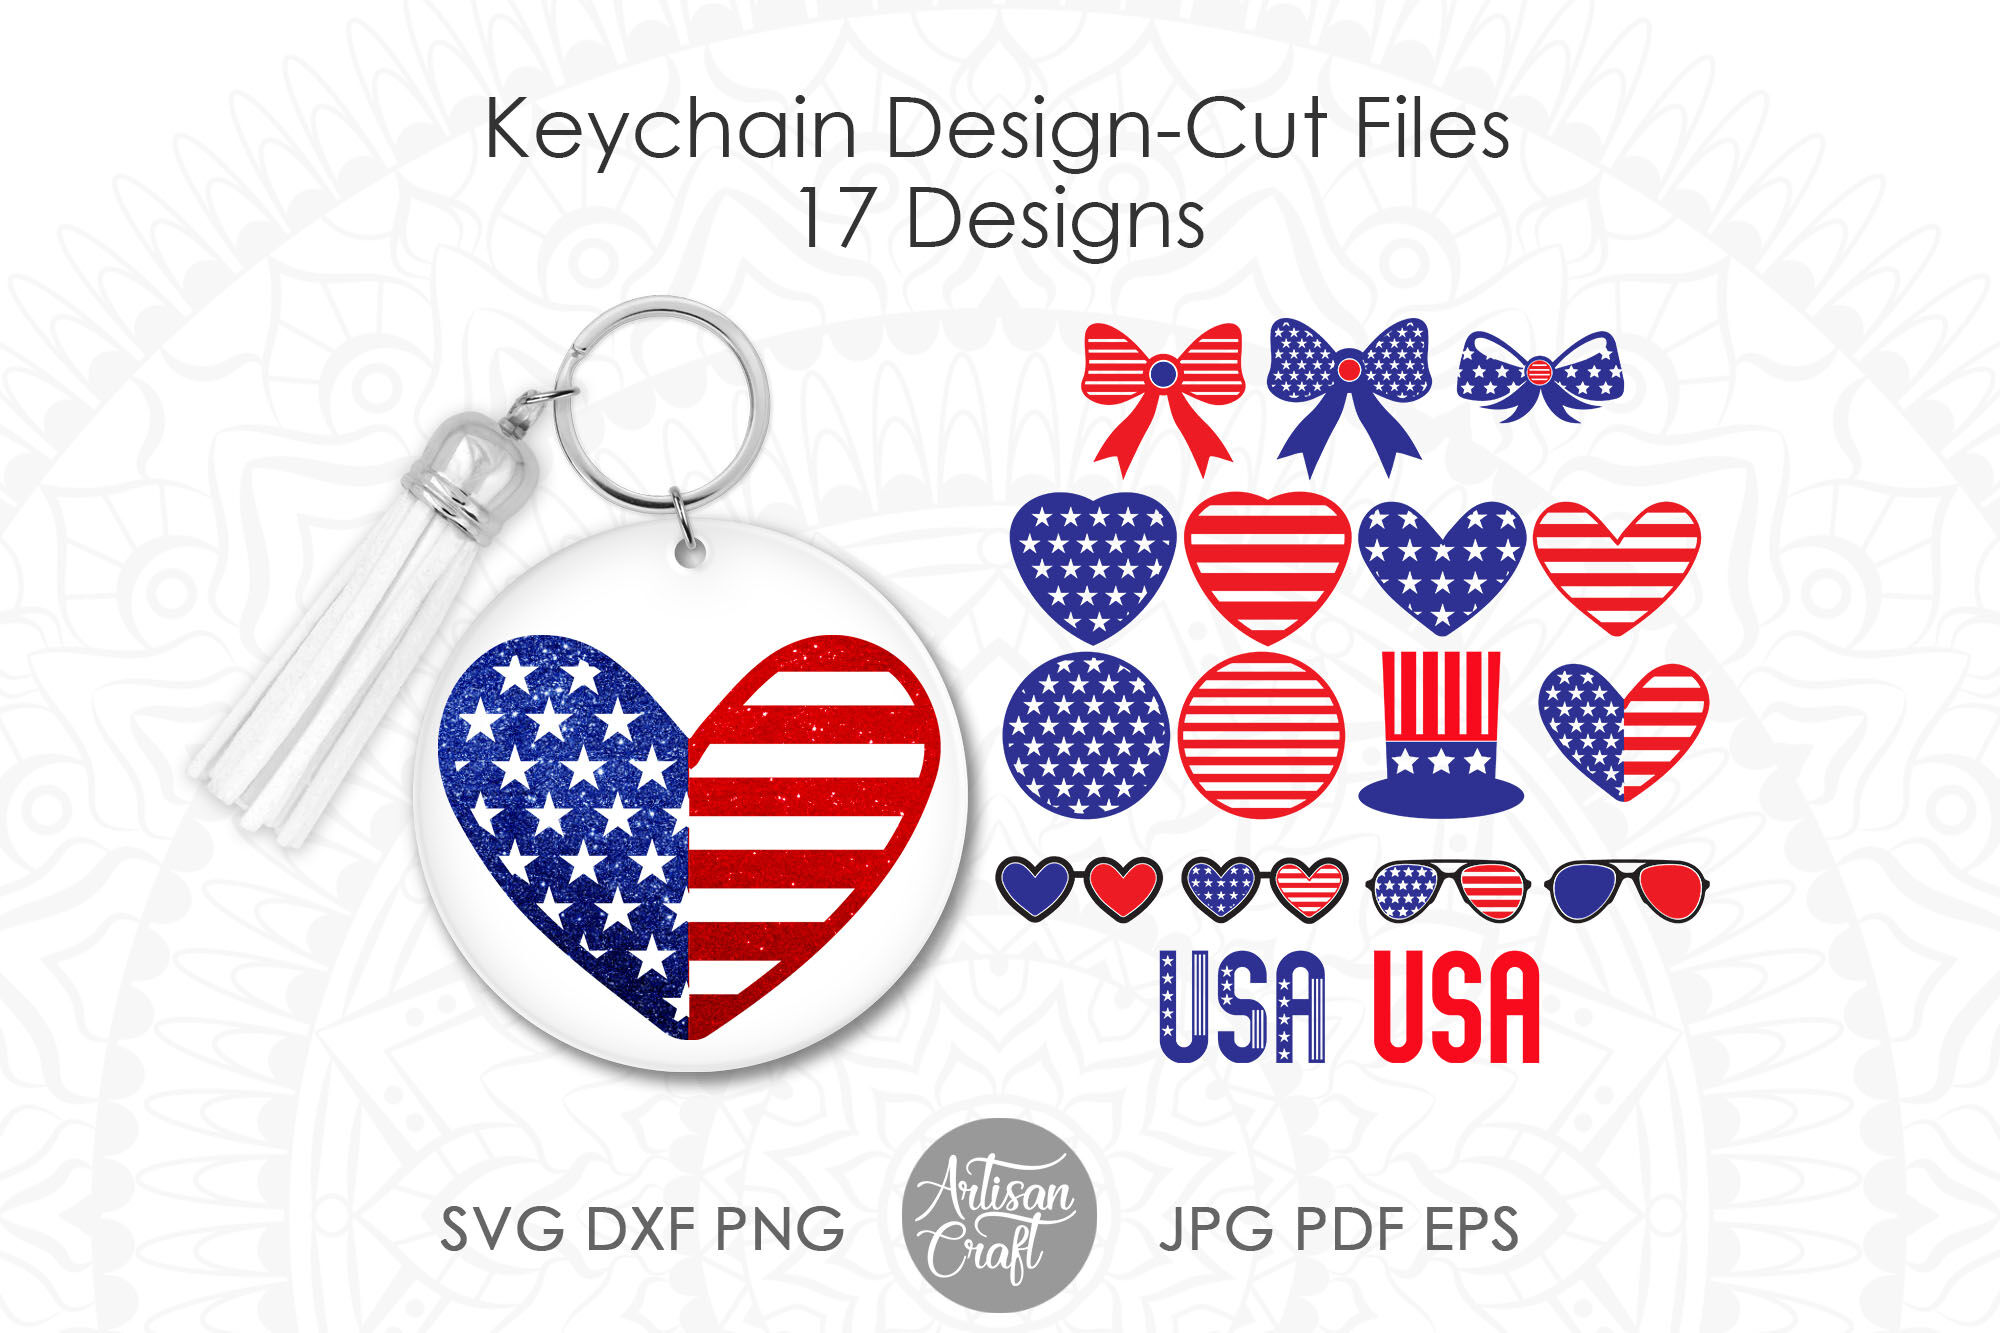 custom made logos key chain for sublimation keychains sublimation